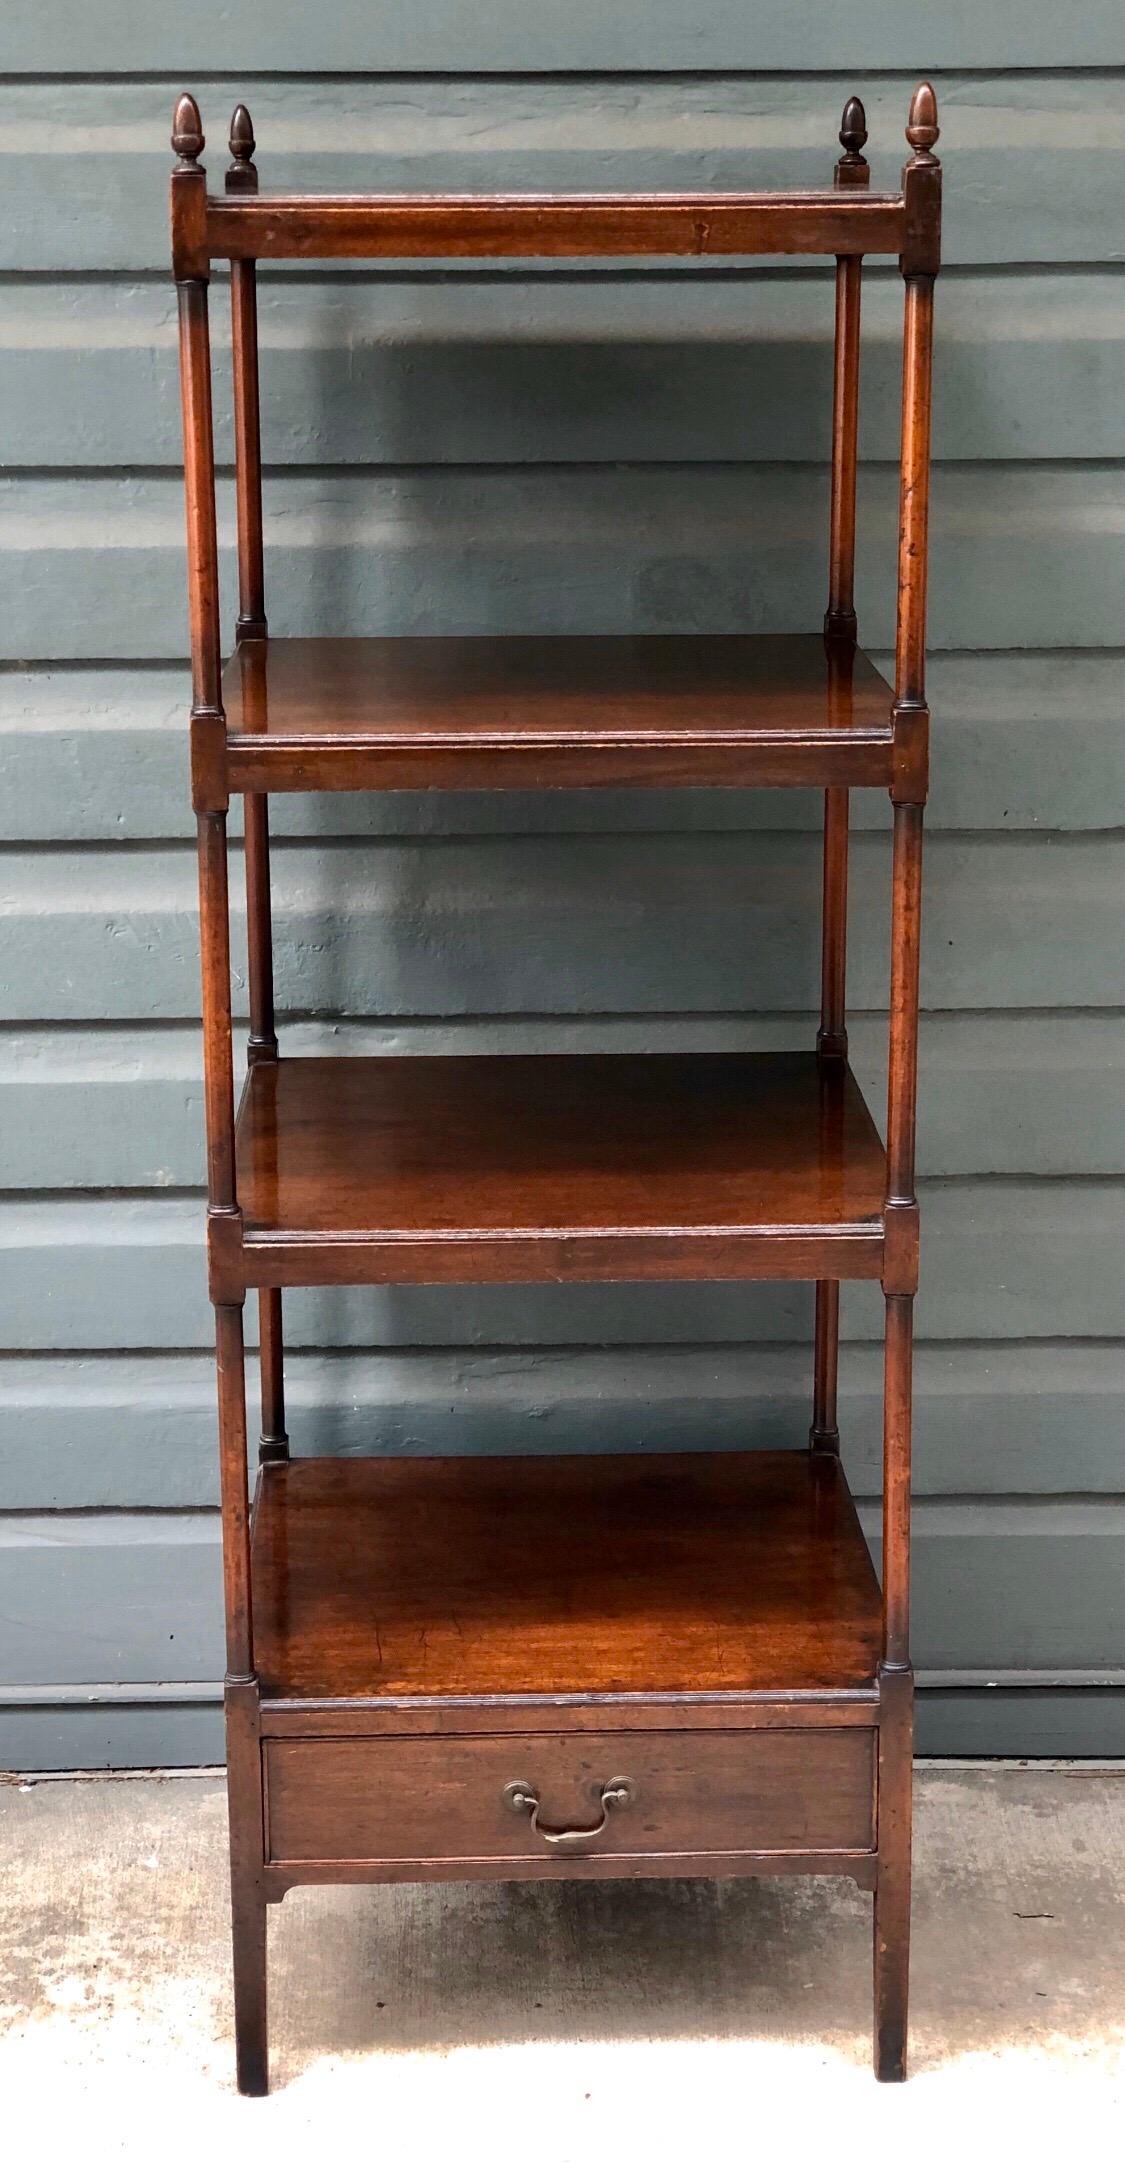 English four-tier library stand with one-drawer. This Regency étagère is solid mahogany and has turned column supports between the shelves and a Classic Marlborough leg below the drawer.